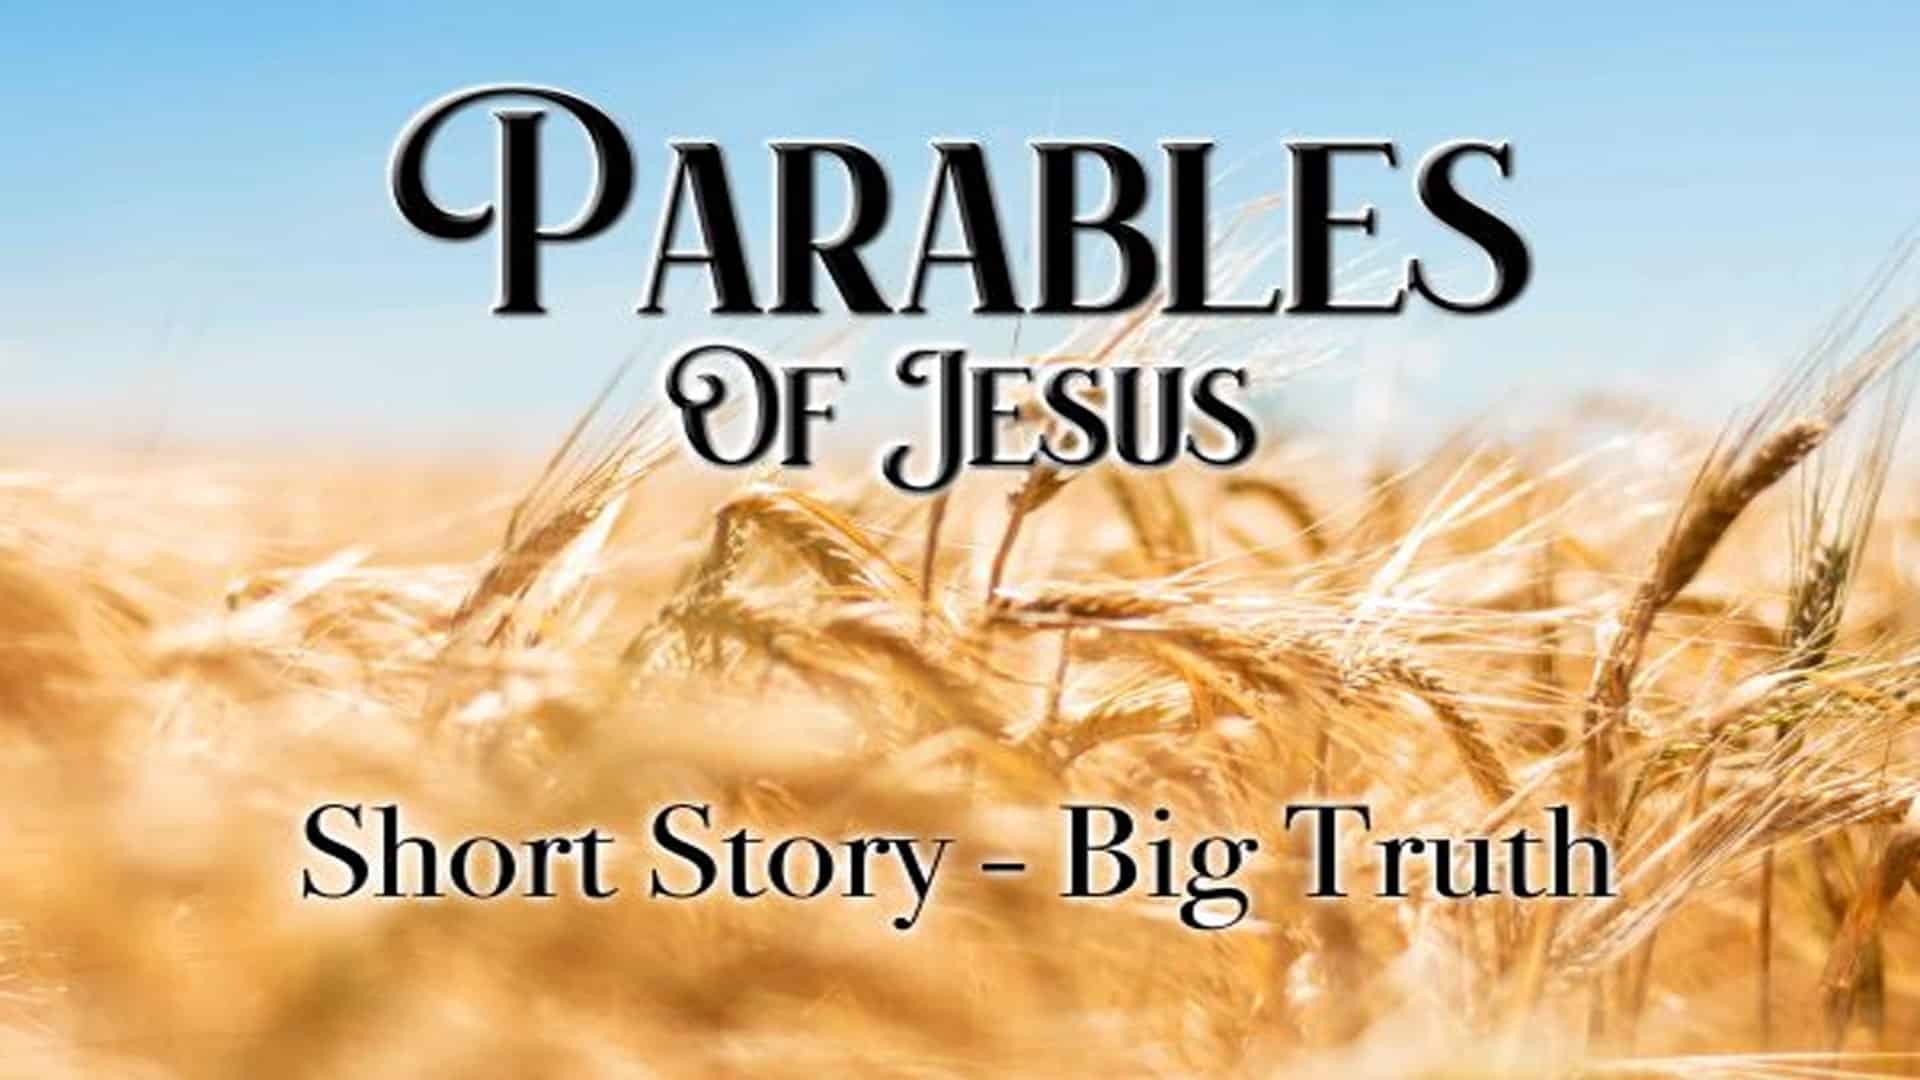 The Parable Of Jesus